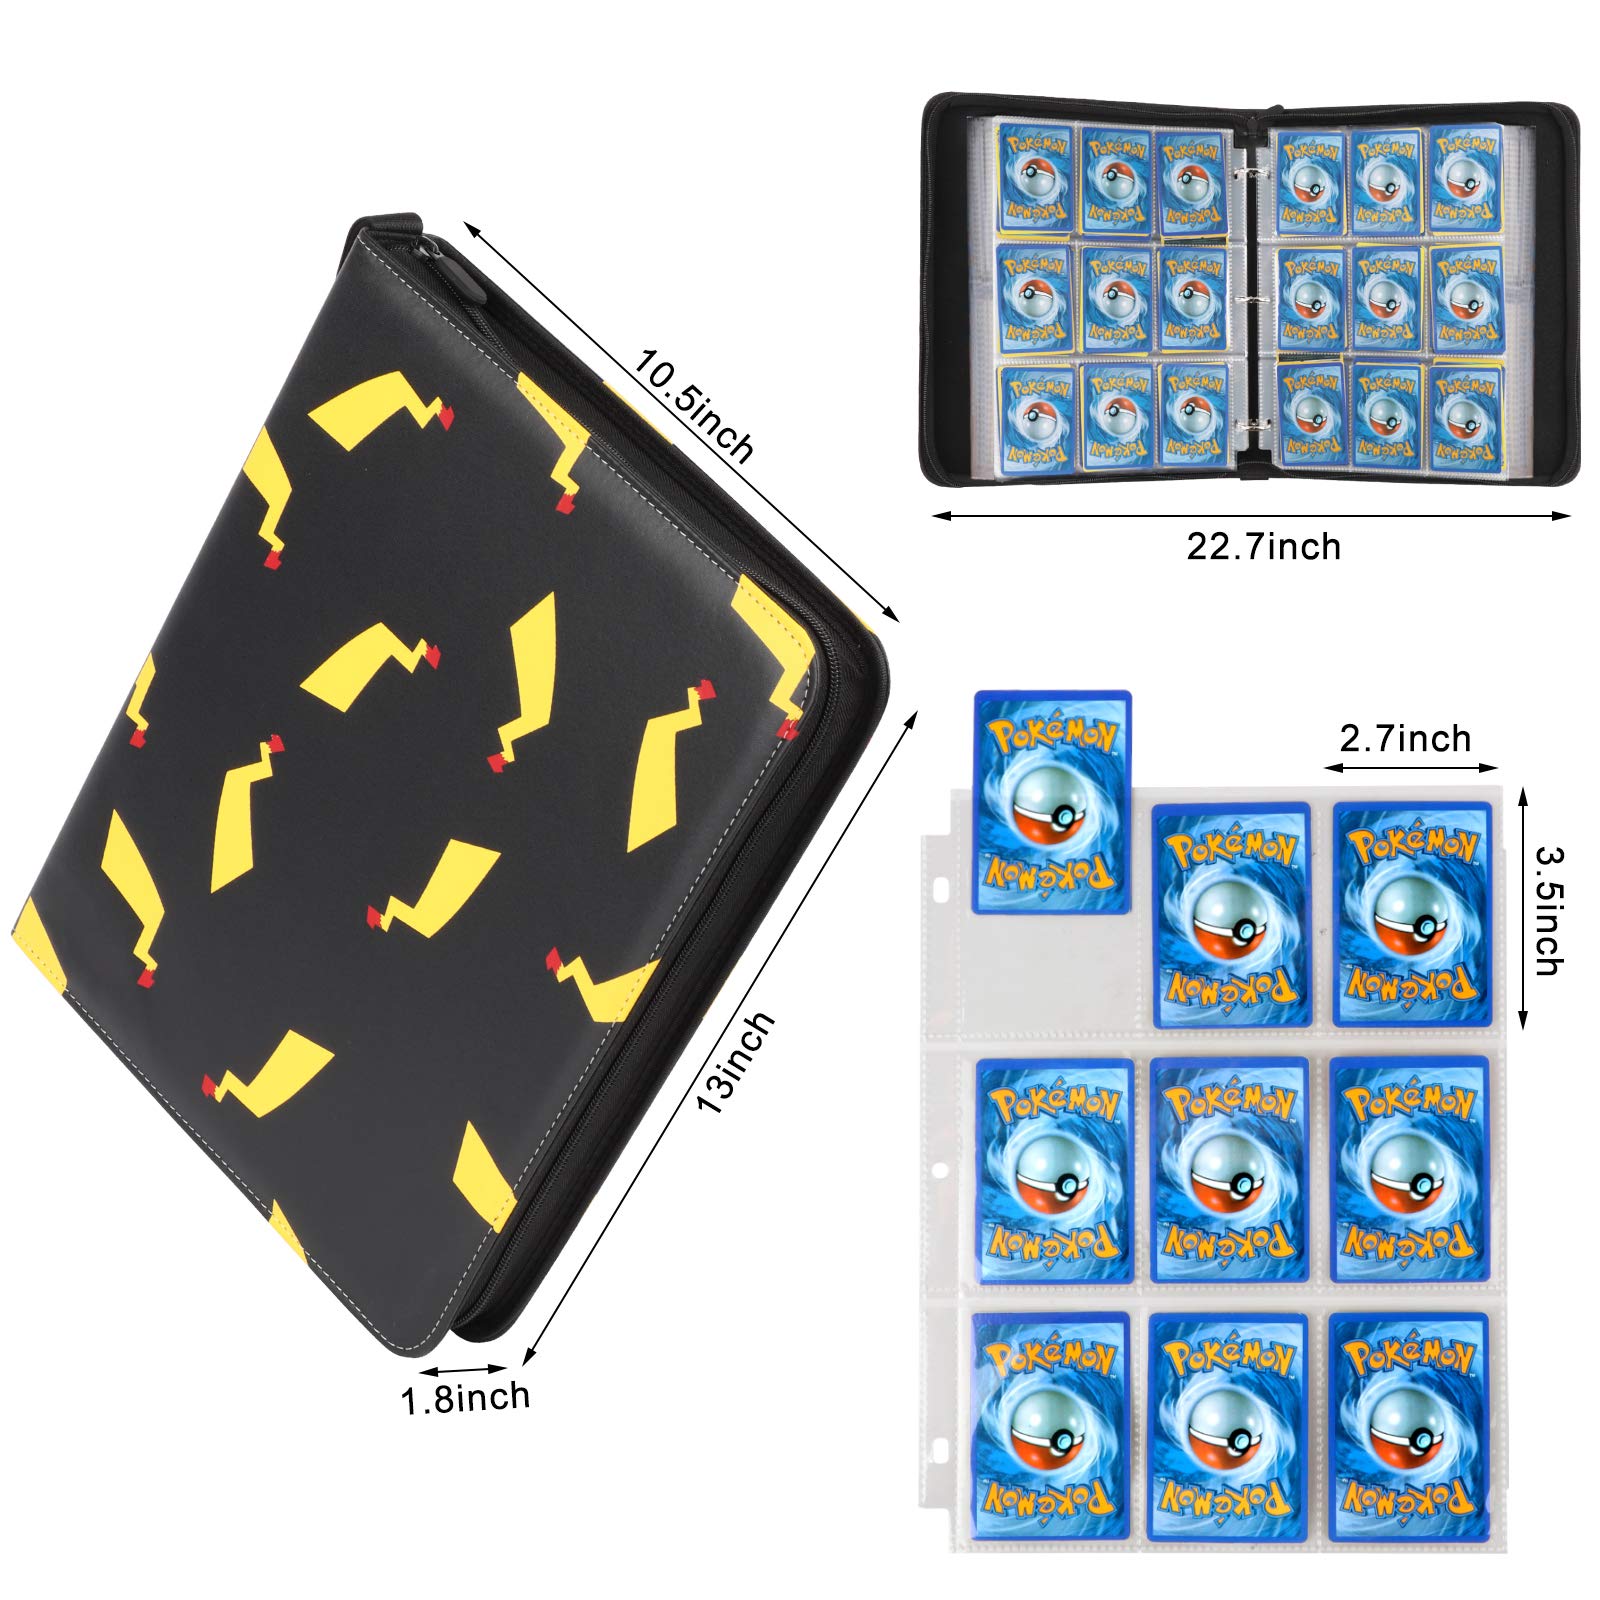 WEWOW Carrying Case Binder for Pokemon Cards, 9-Pocket Card Binder Holder Fits 900 Cards with 50 Pages, Card Binder Collector Album Storage Book Folder for Trading Cards.